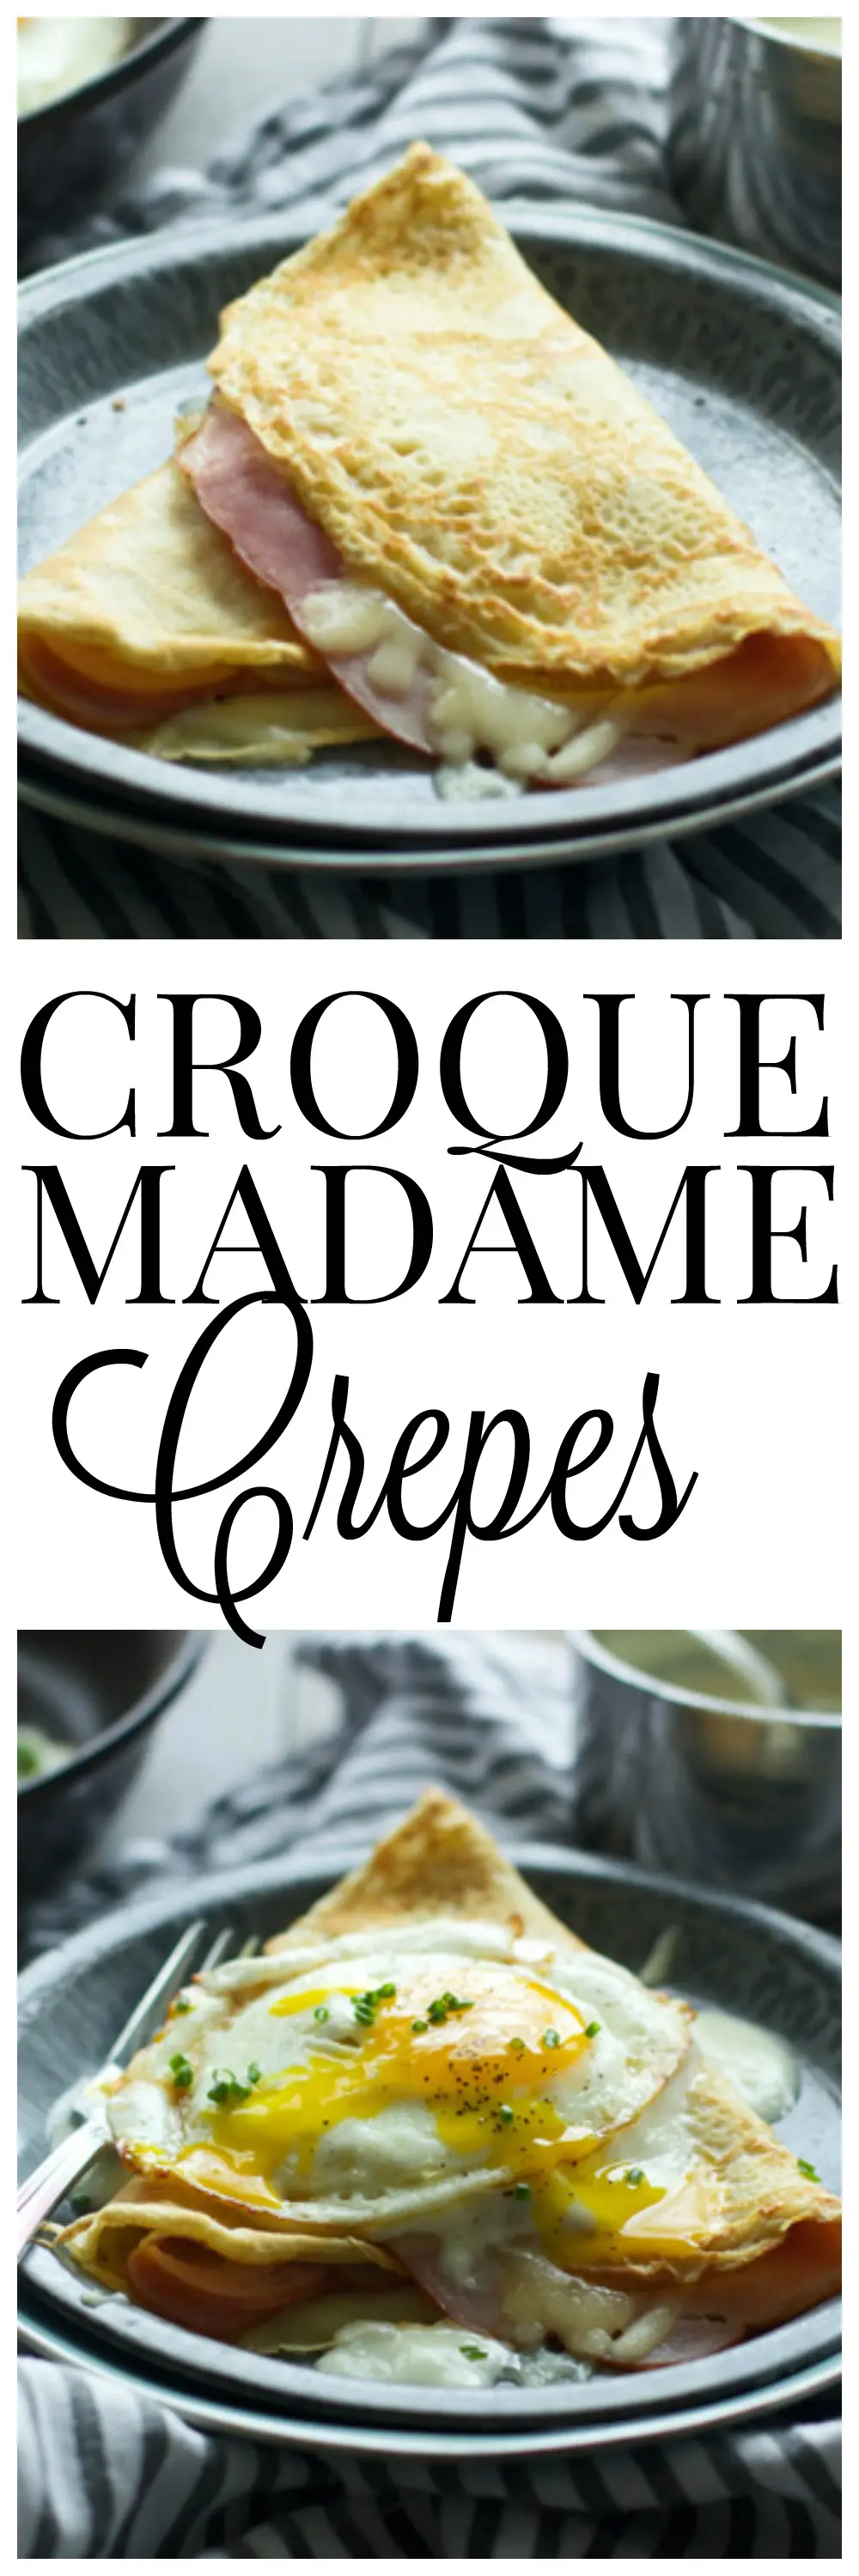 Croque Madame Crepes - An easy meal that will impress anyone!